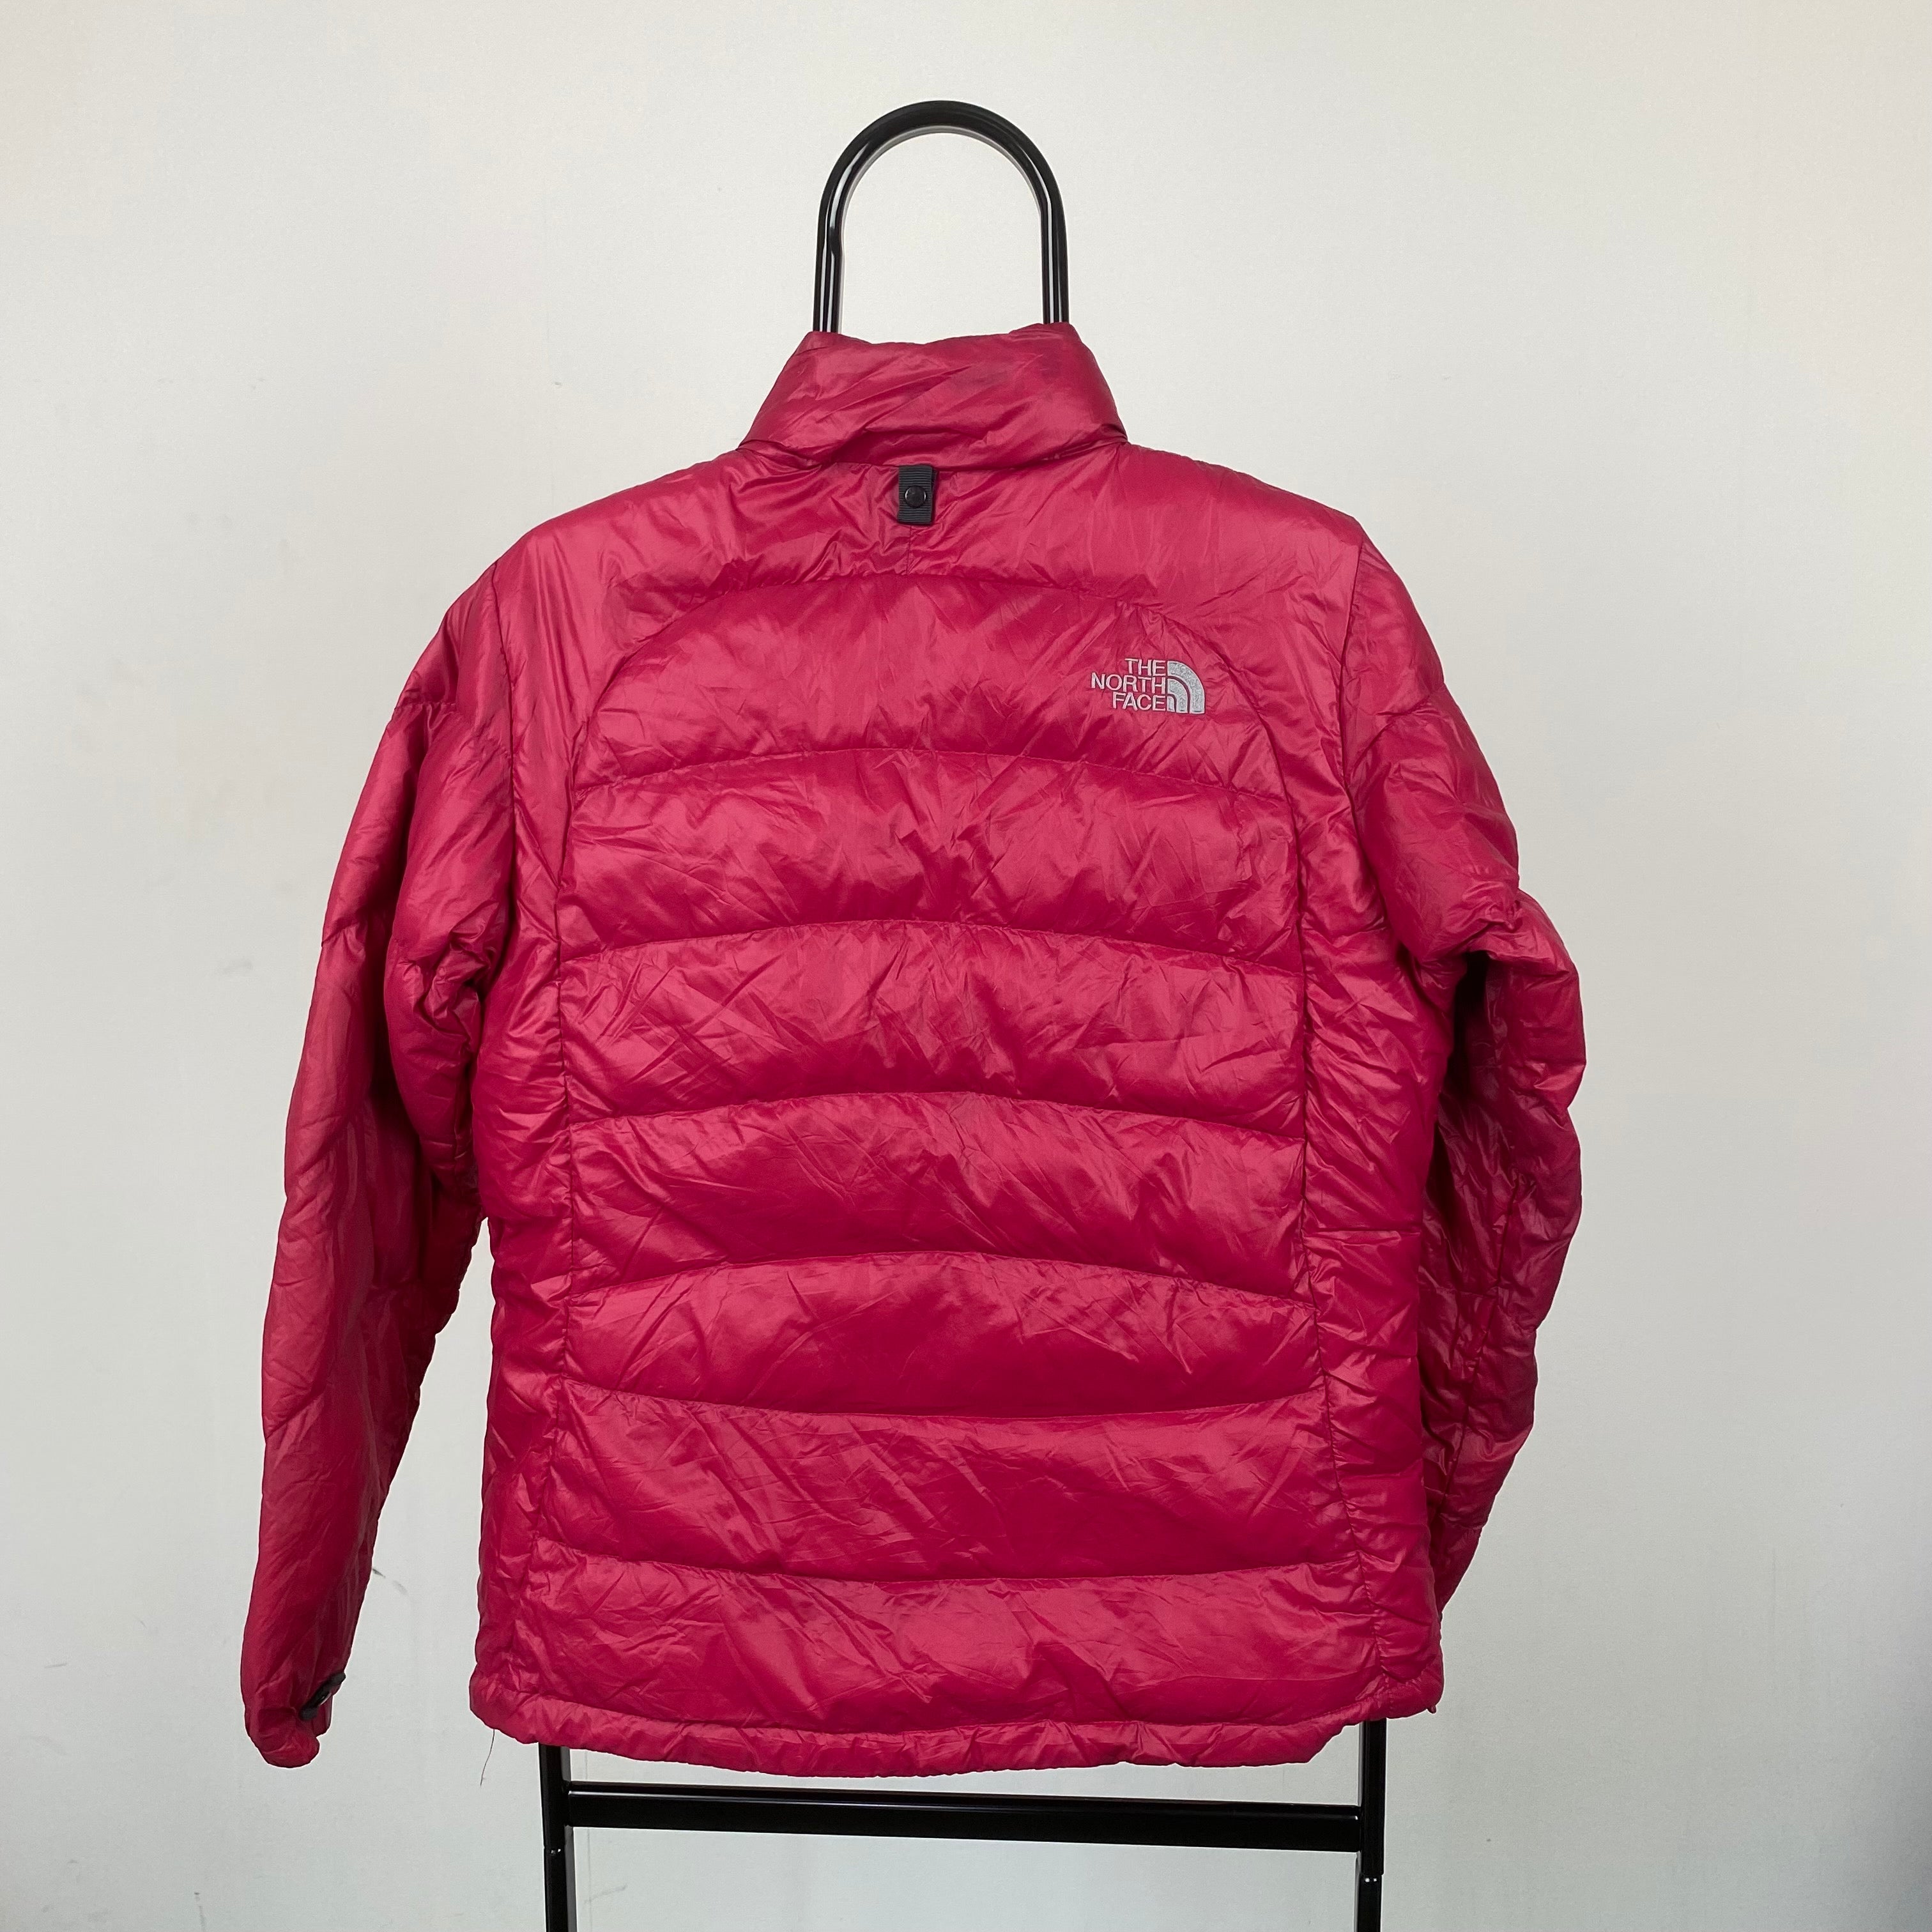 90s The North Face Puffer Jacket Pink XS